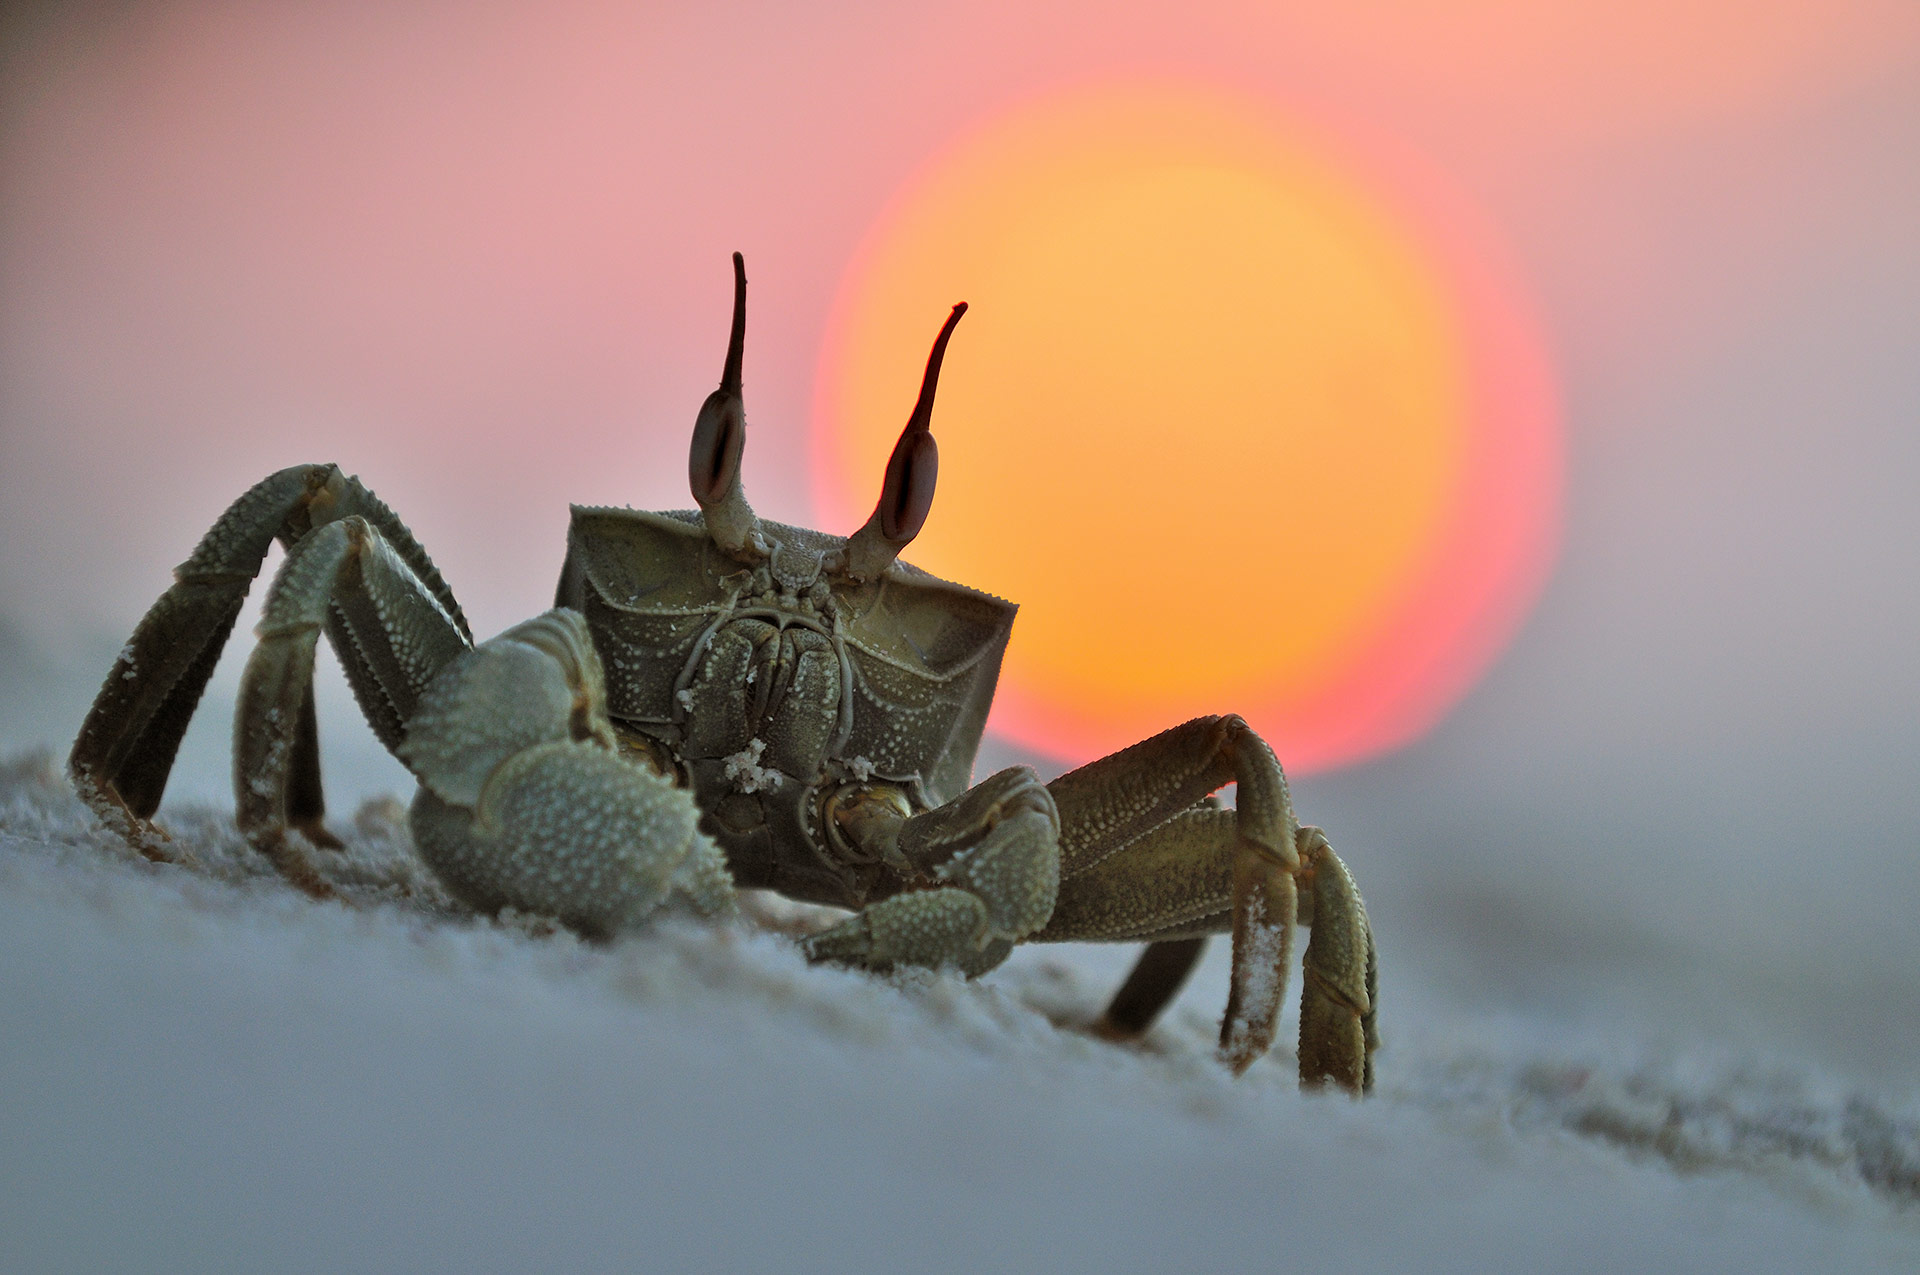 Horned ghost crab at sunset